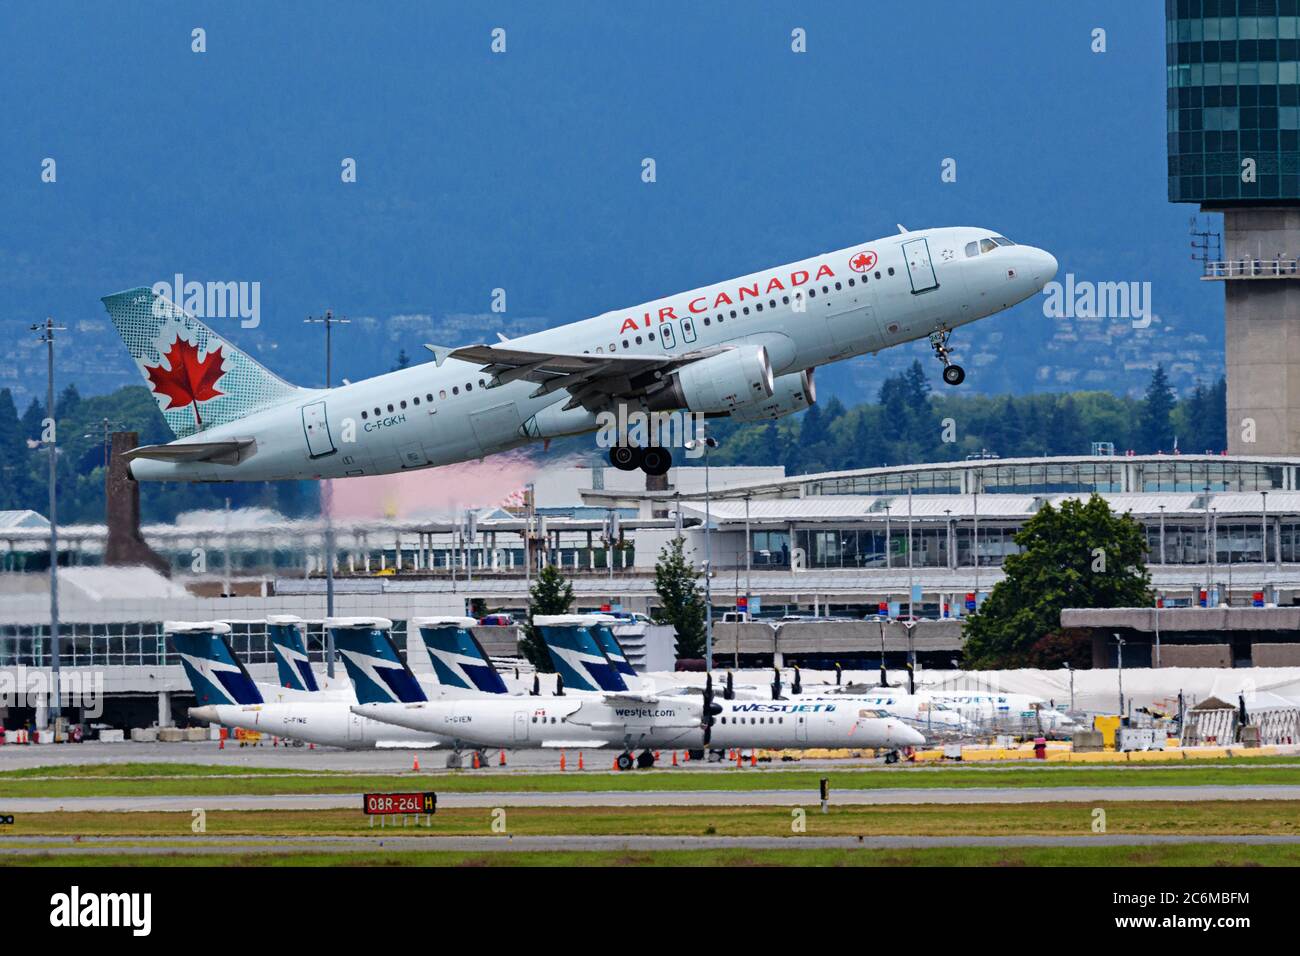 Richmond, British Columbia, Canada. 7th July, 2020. An Air Canada Airbus A320 jet (C-FGKH) takes off from Vancouver International Airport on a flight to Ottawa, July 7, 2020. In the background WestJet Encore Bombardier Q400 planes remain parked due to reduced air travel because of the COVID-19 pandemic. Credit: Bayne Stanley/ZUMA Wire/Alamy Live News Stock Photo